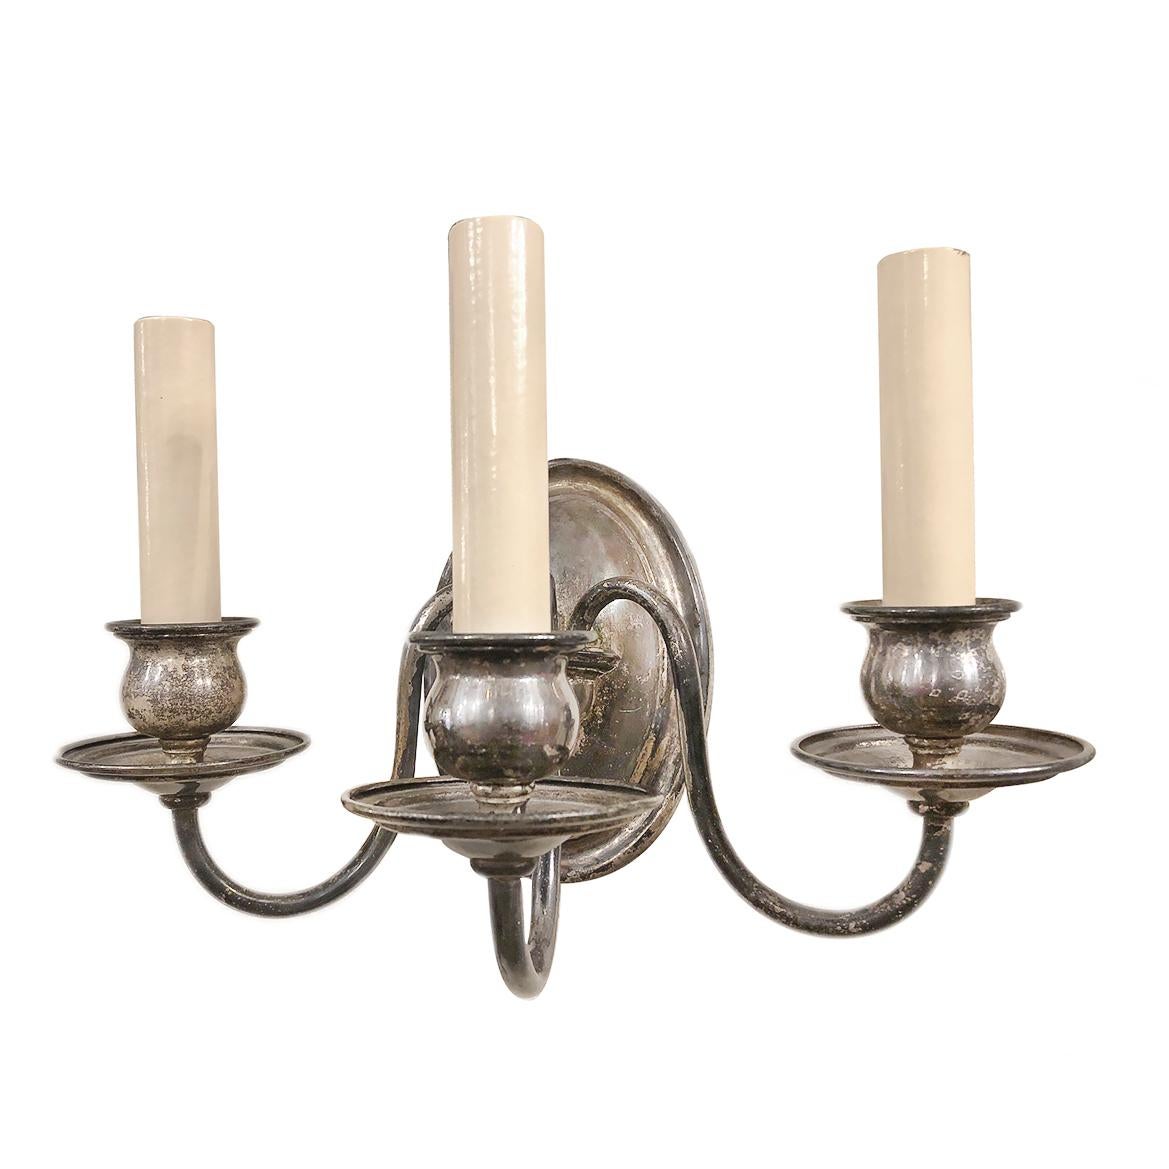 Pair of circa 1920's English silver-plated three-arm sconces.

Measurements:
Height: 7